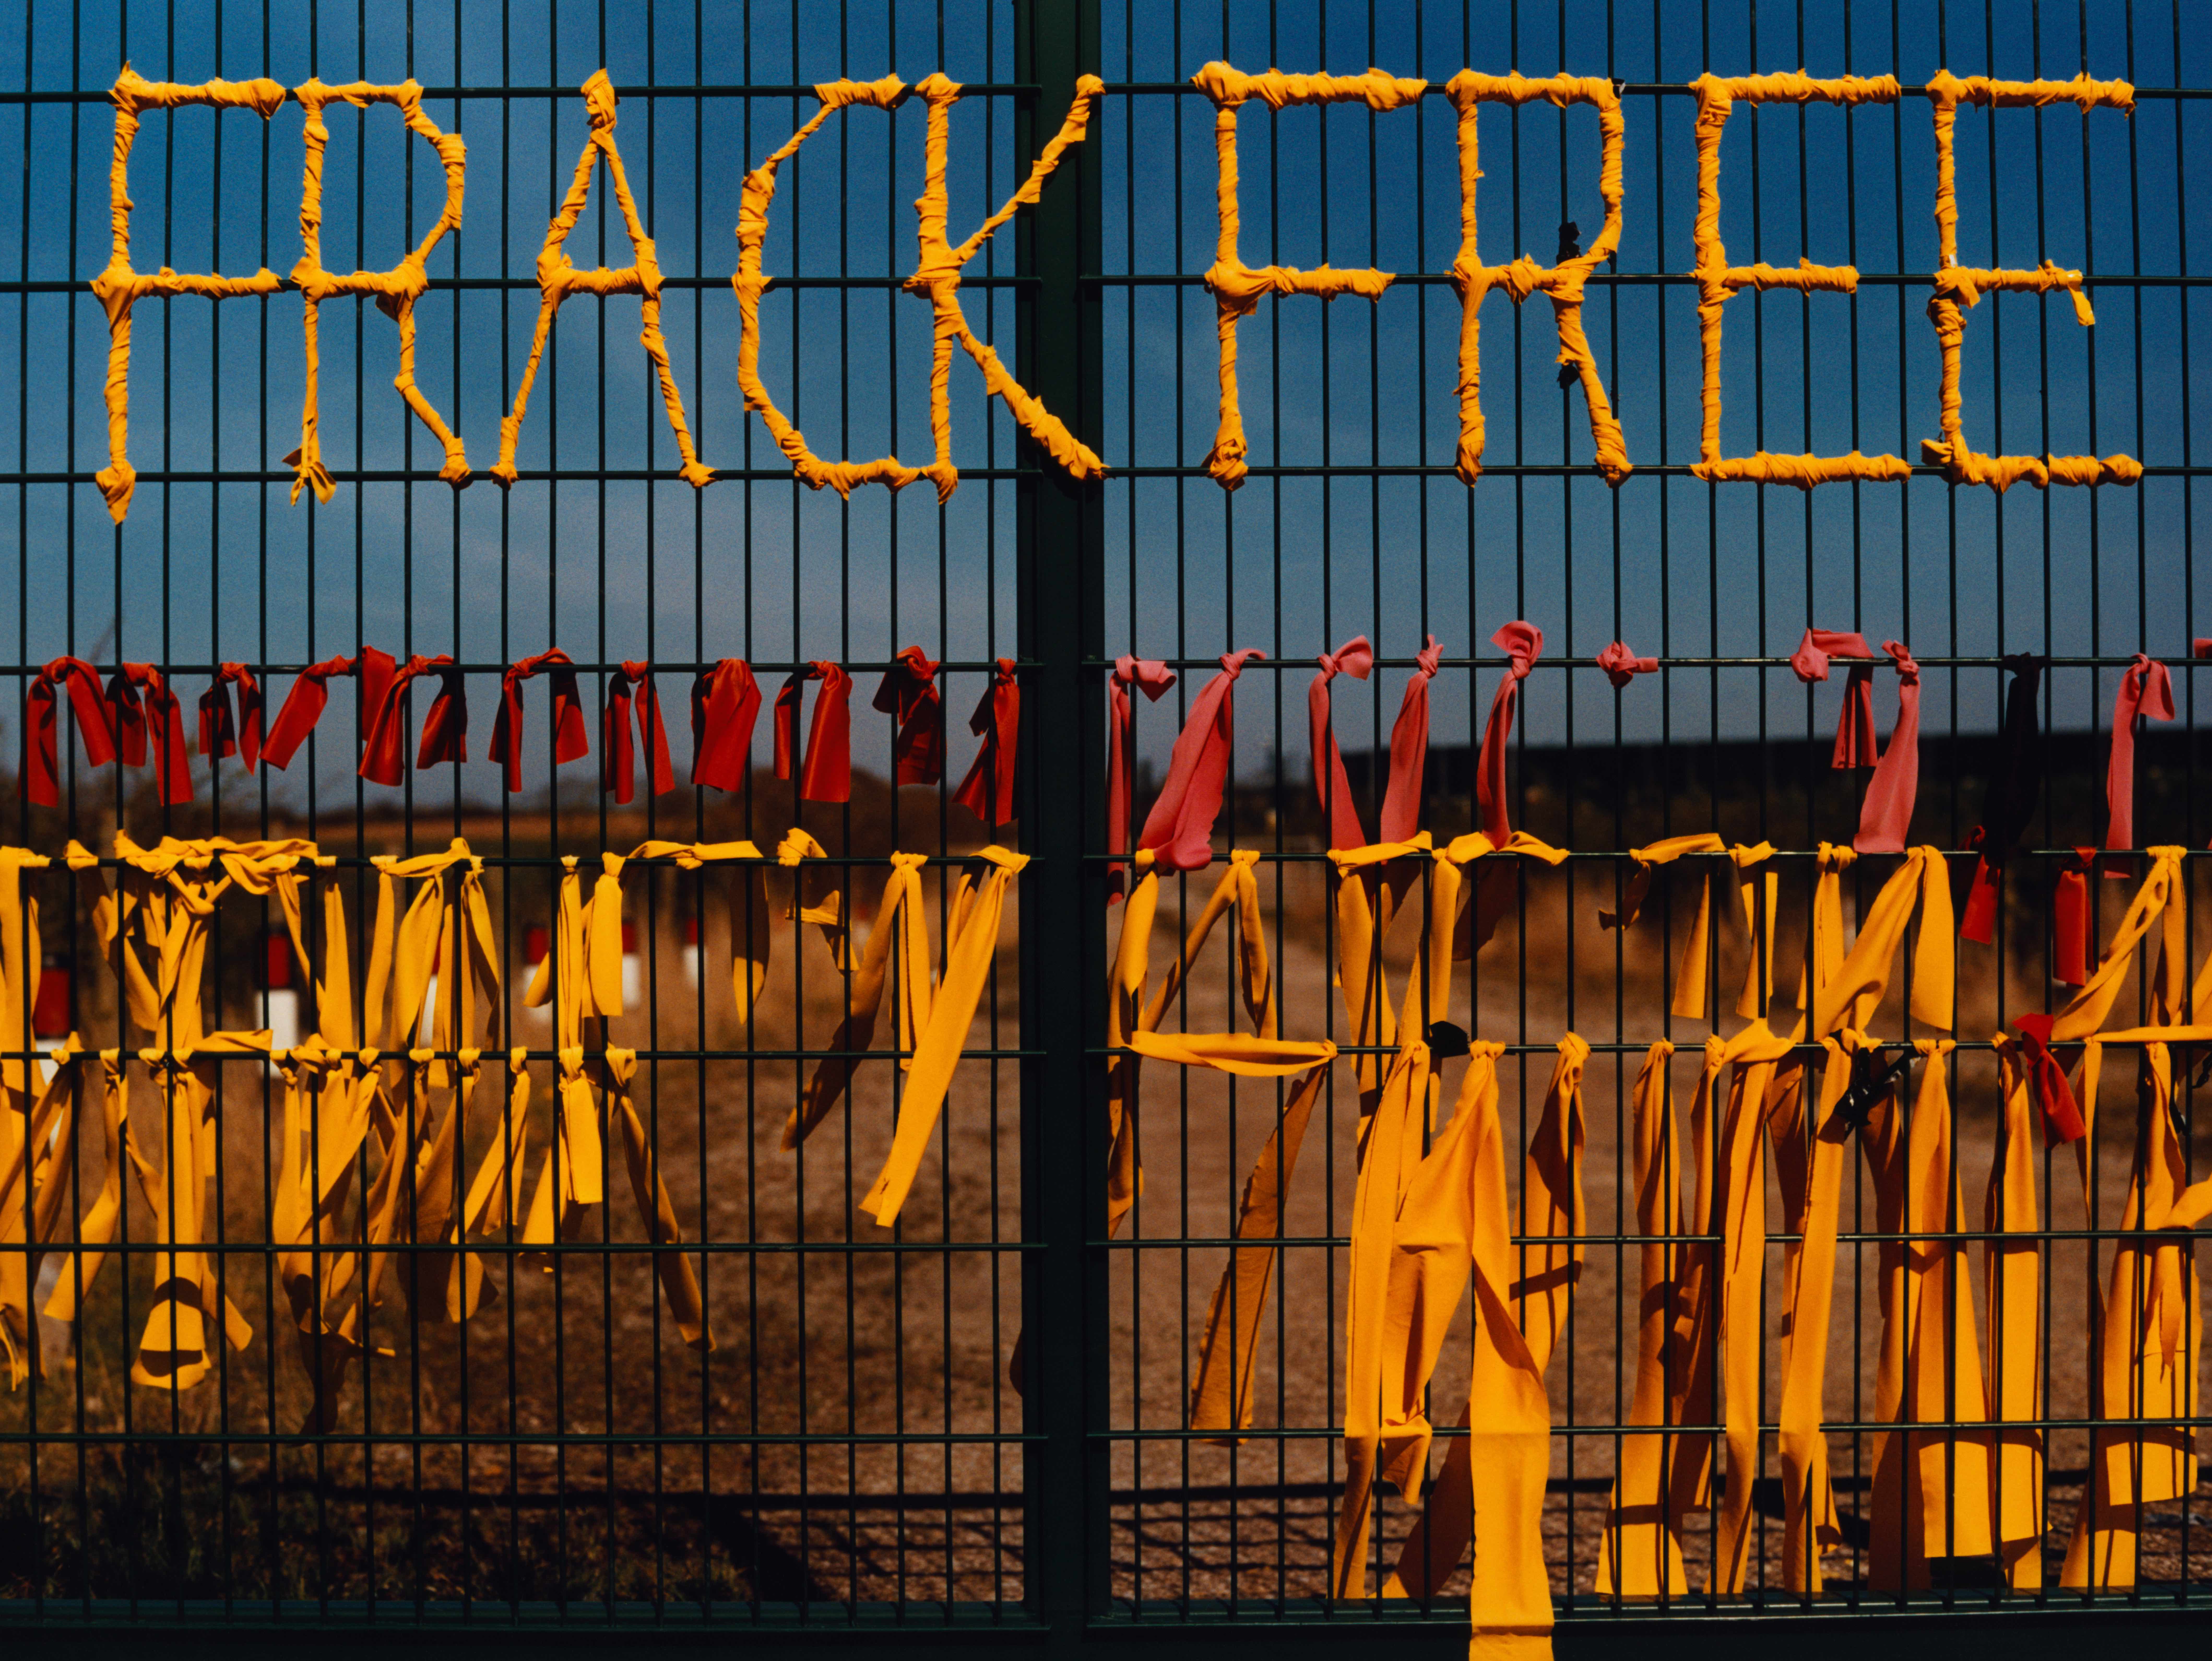 A gate for one of the former fracking sites in the UK. The Nanas have tied dozens of yellow ribbons on the fence, and separately wrapped yellow ribbon so that it spells FRACK FREE. 